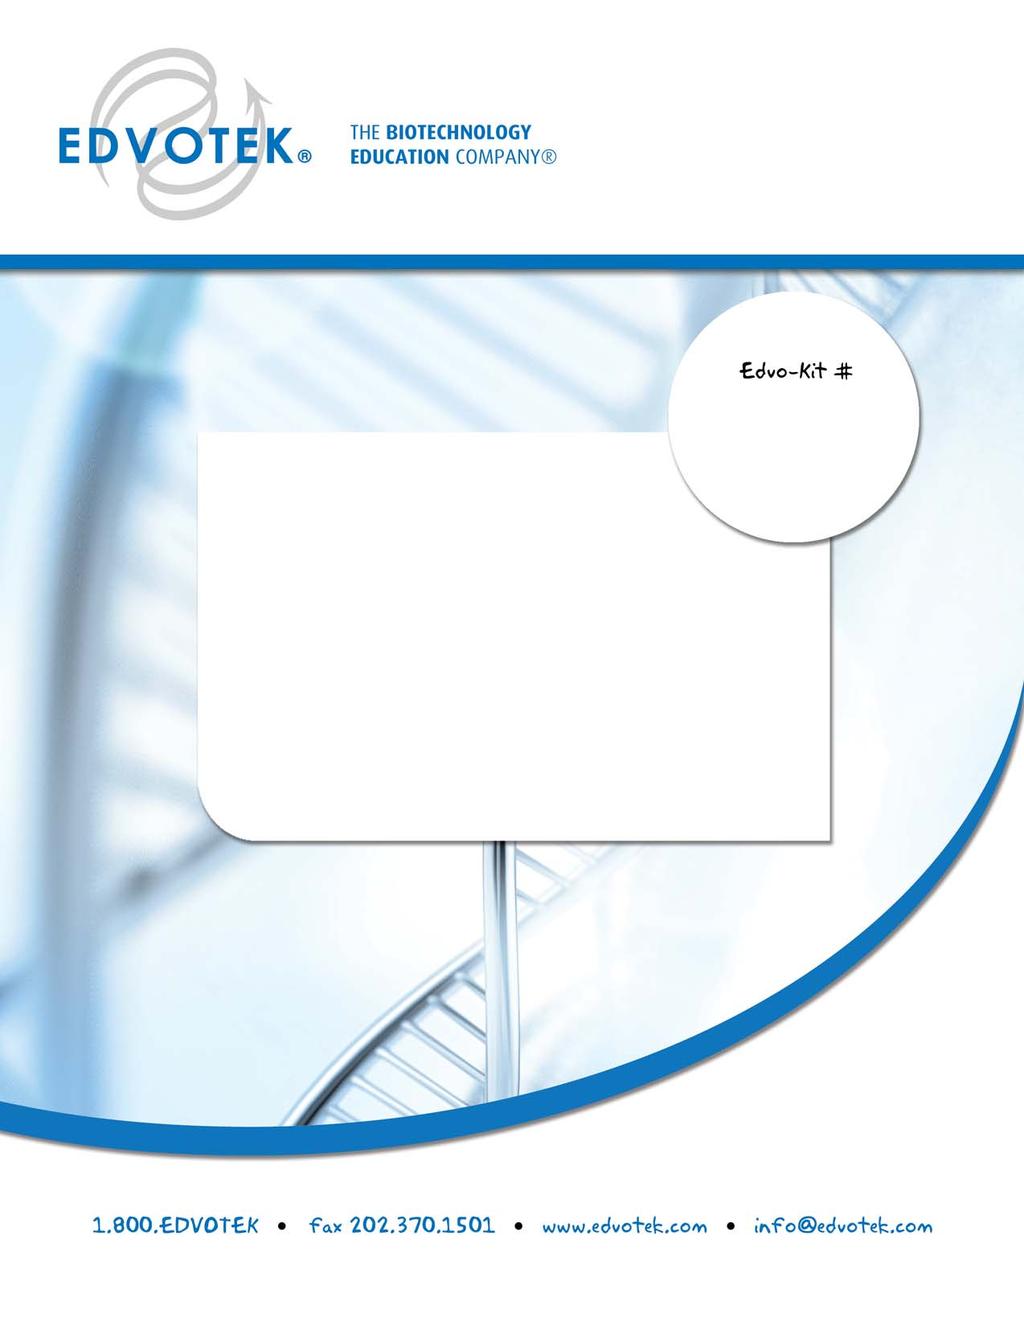 Revised and Updated 335 Edvo-Kit #335 Reverse Transcription PCR (RT-PCR): The Molecular Biology of HIV Replication Experiment Objective: The objective of this experiment is